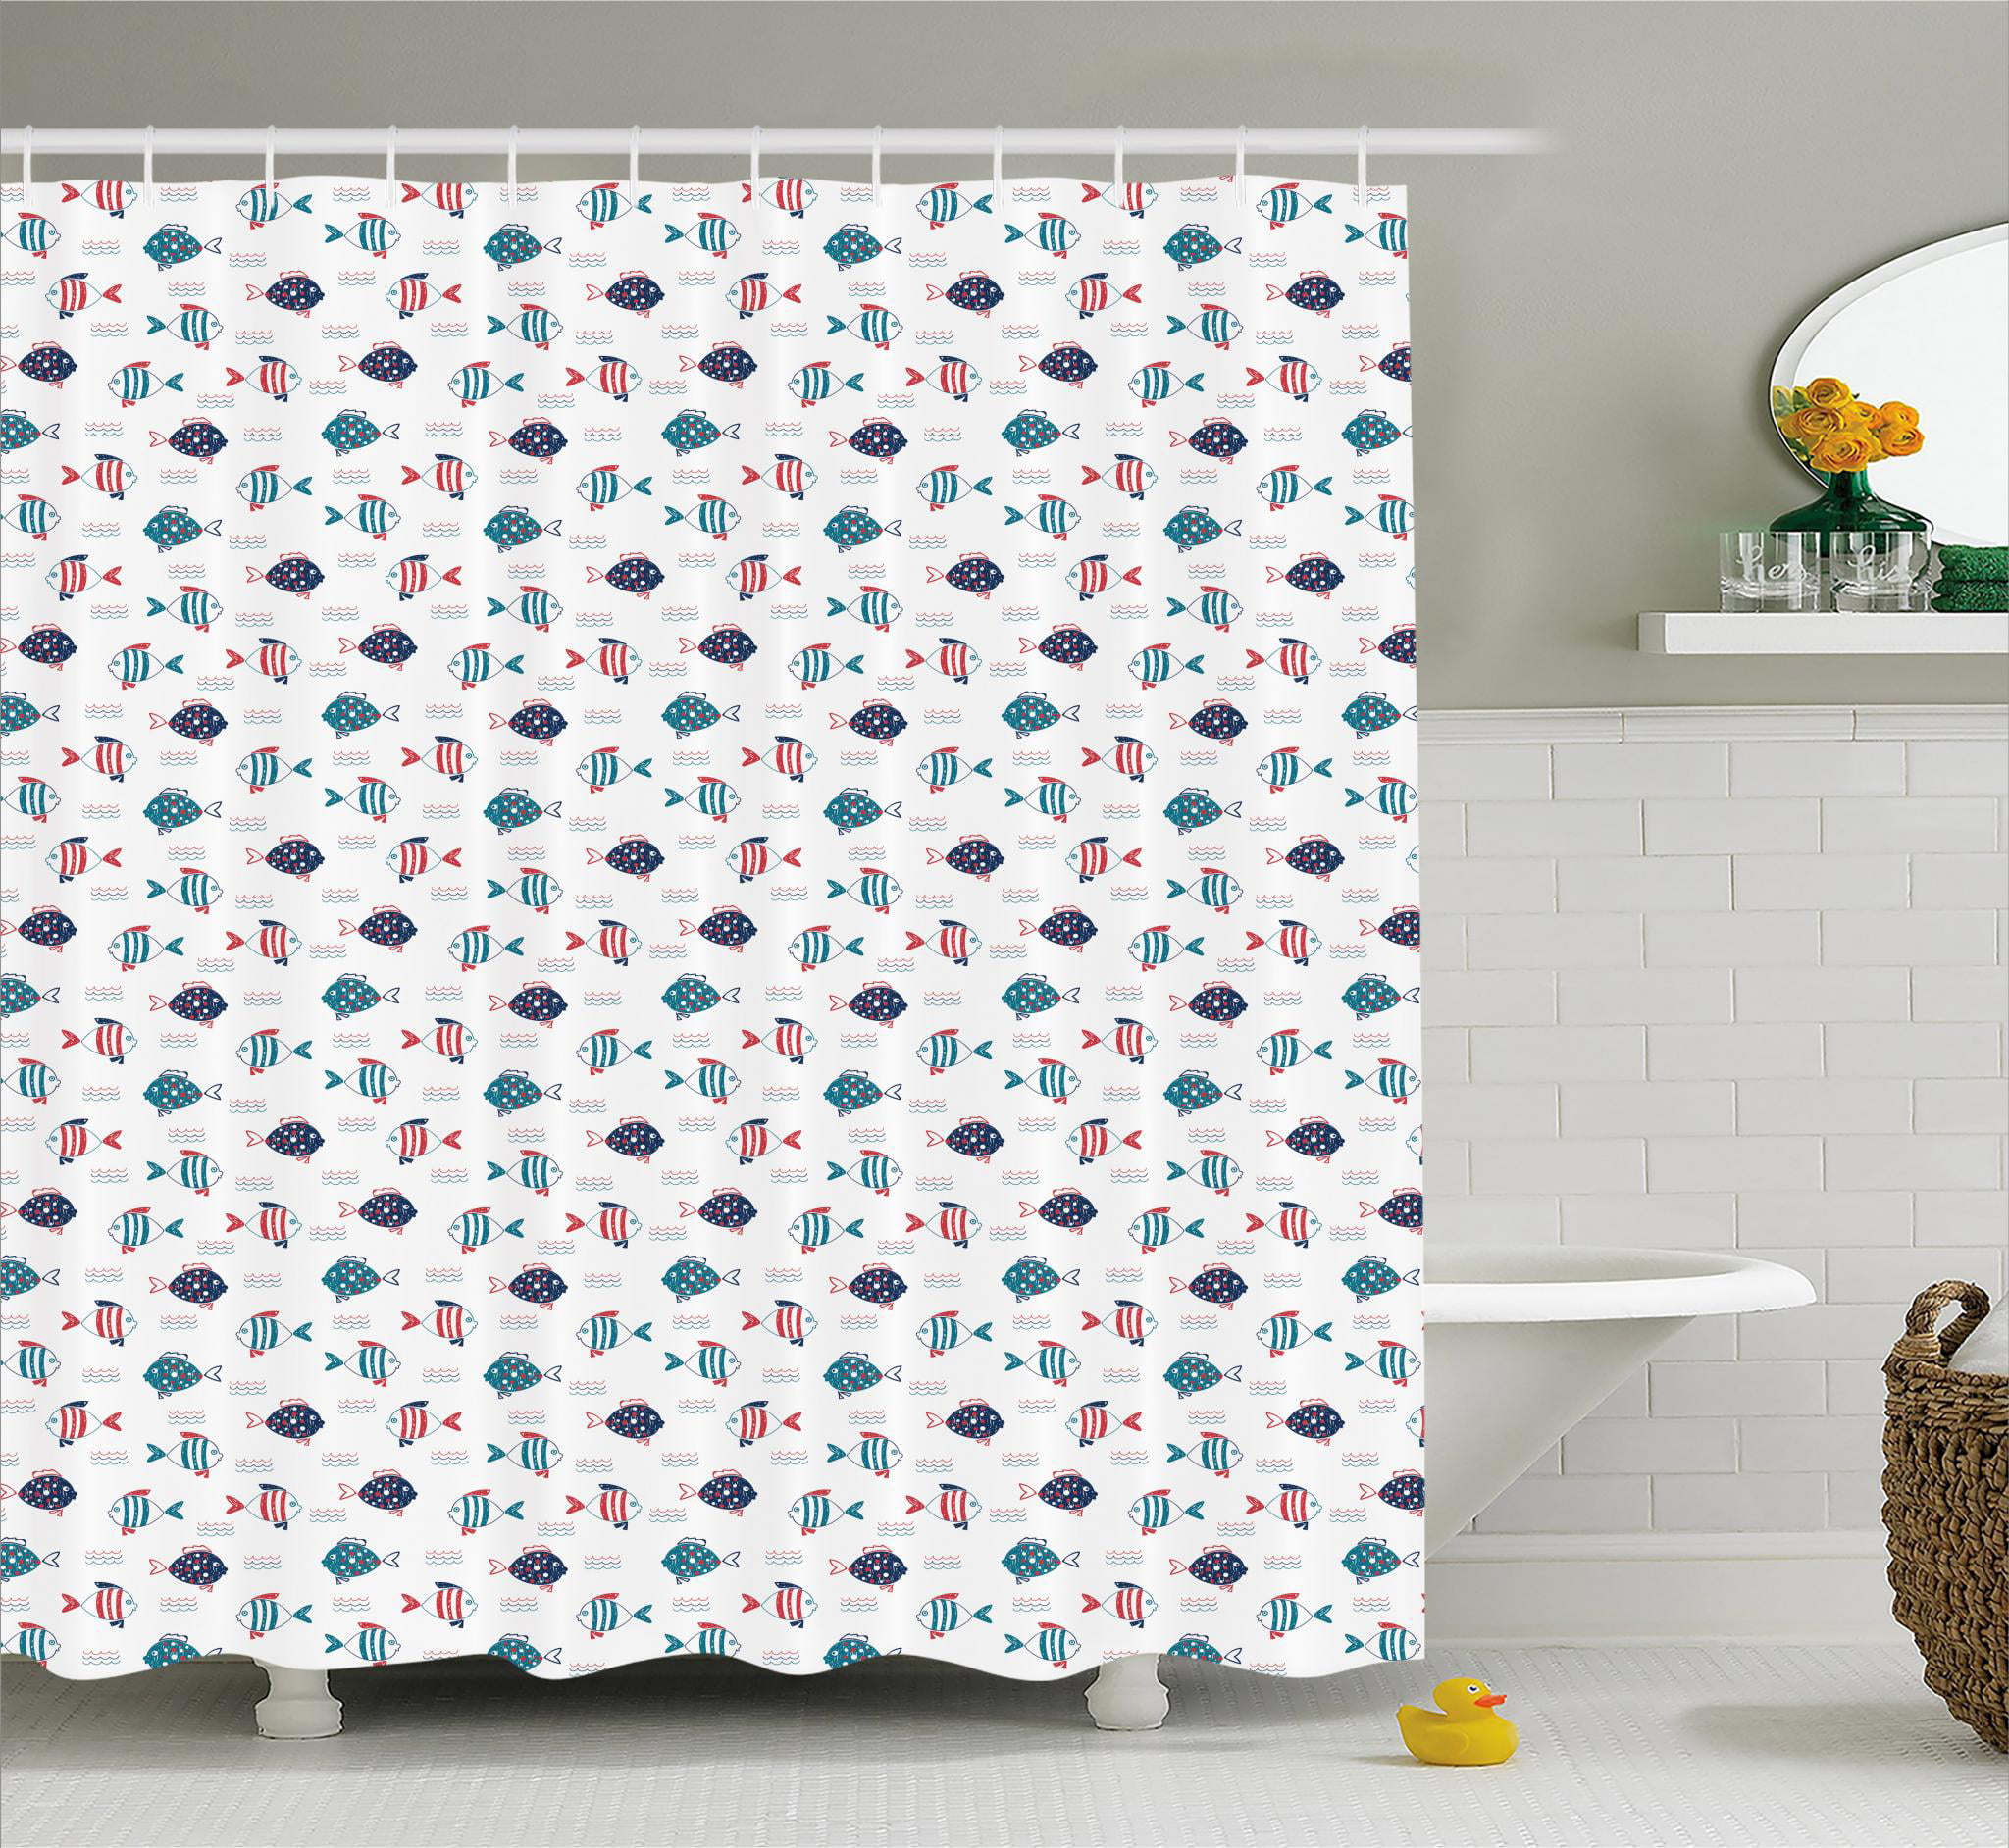 Fish Shower Curtain, Pattern of Fish with Stripes and Fin